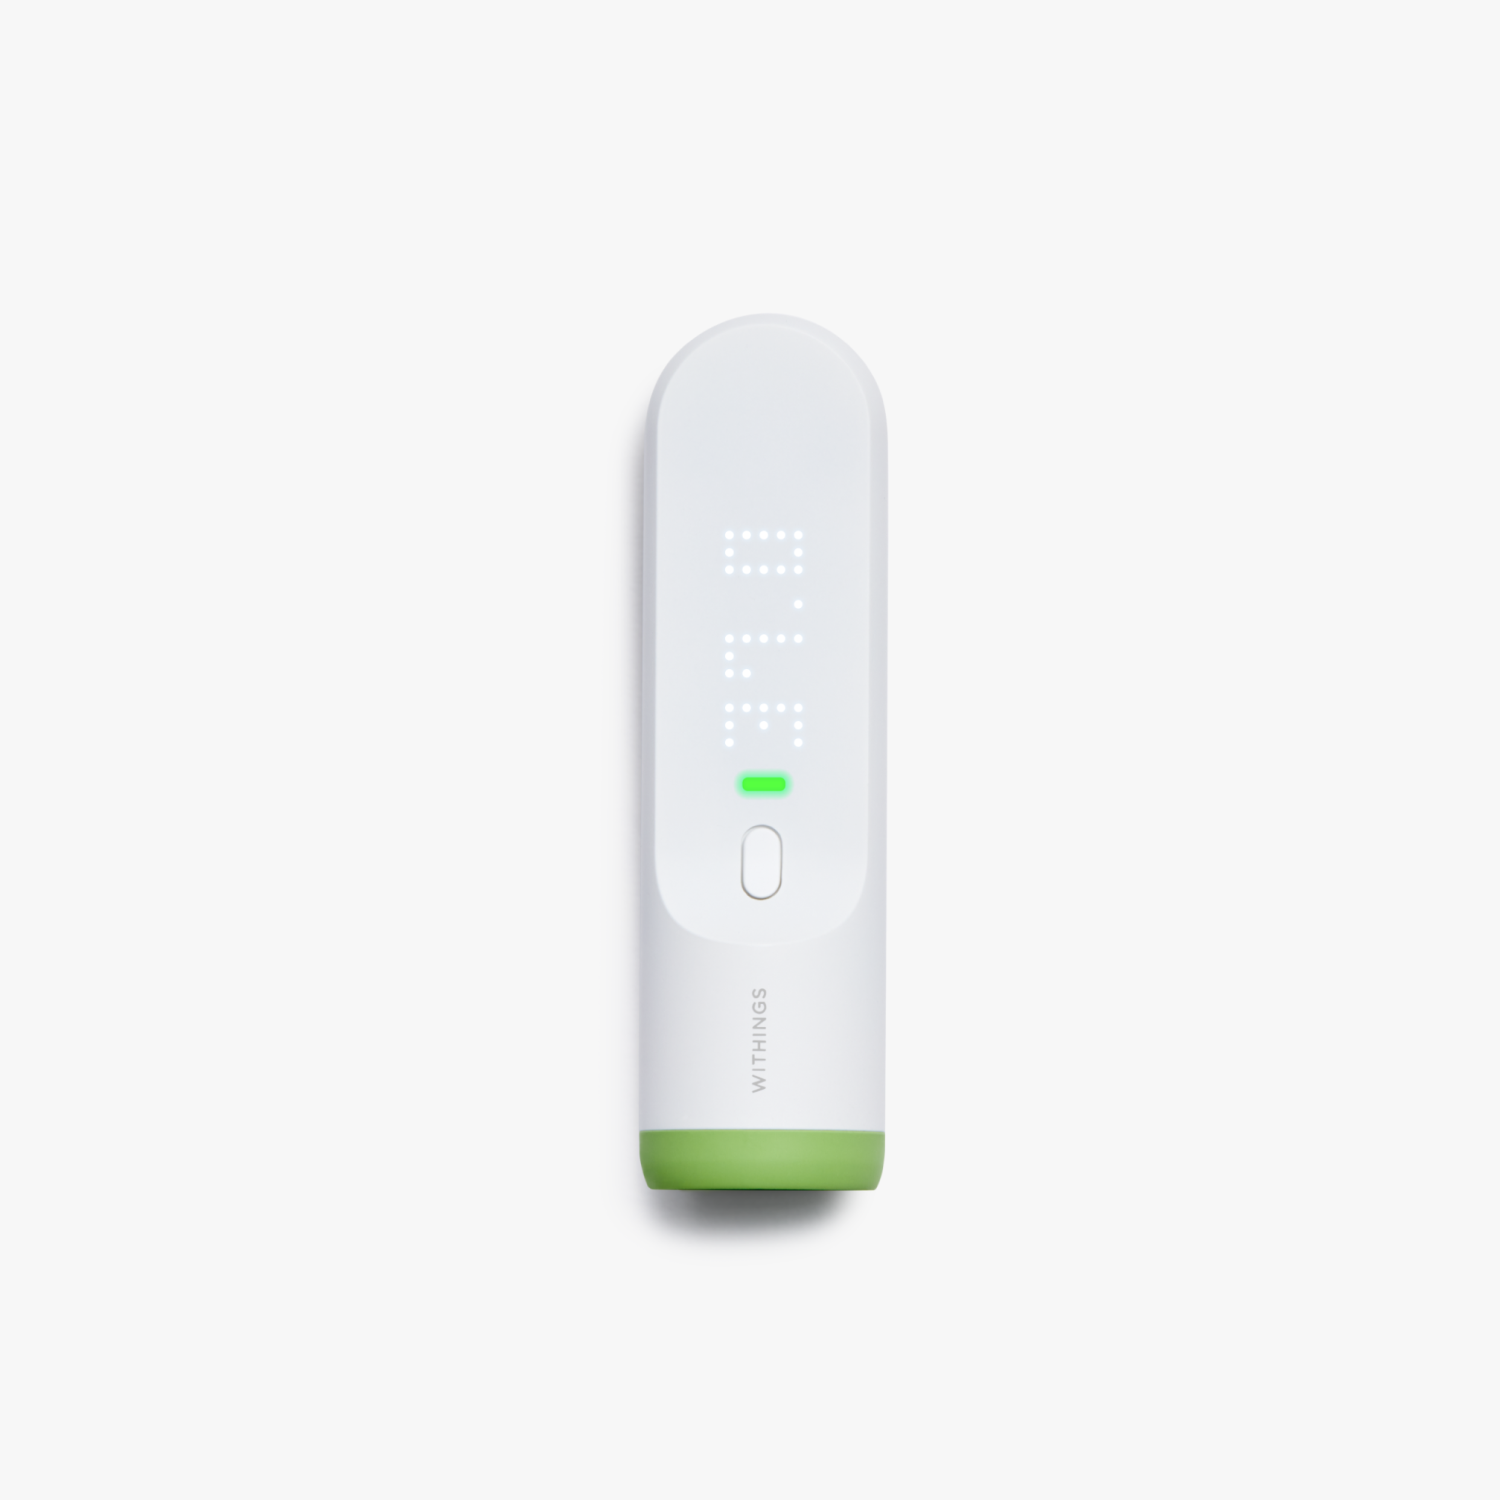 Withings Thermo - Smart Temporal Thermometer - Clinical accuracy, Wireless Sync, Multi-user - Withings Official Store